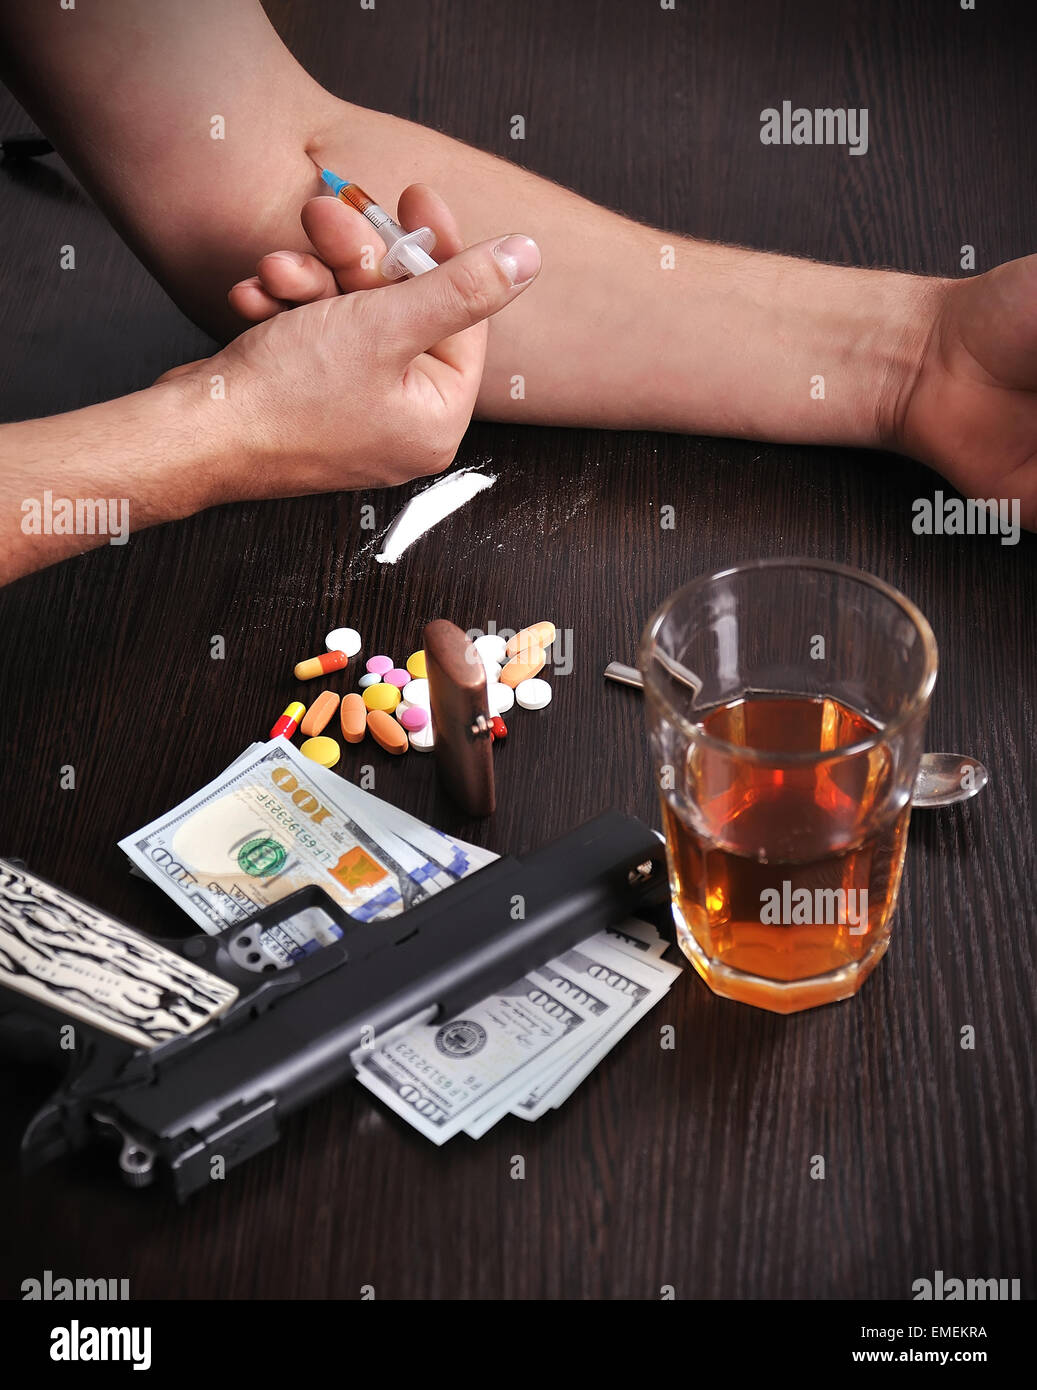 Drug addict man with syringe in action Stock Photo